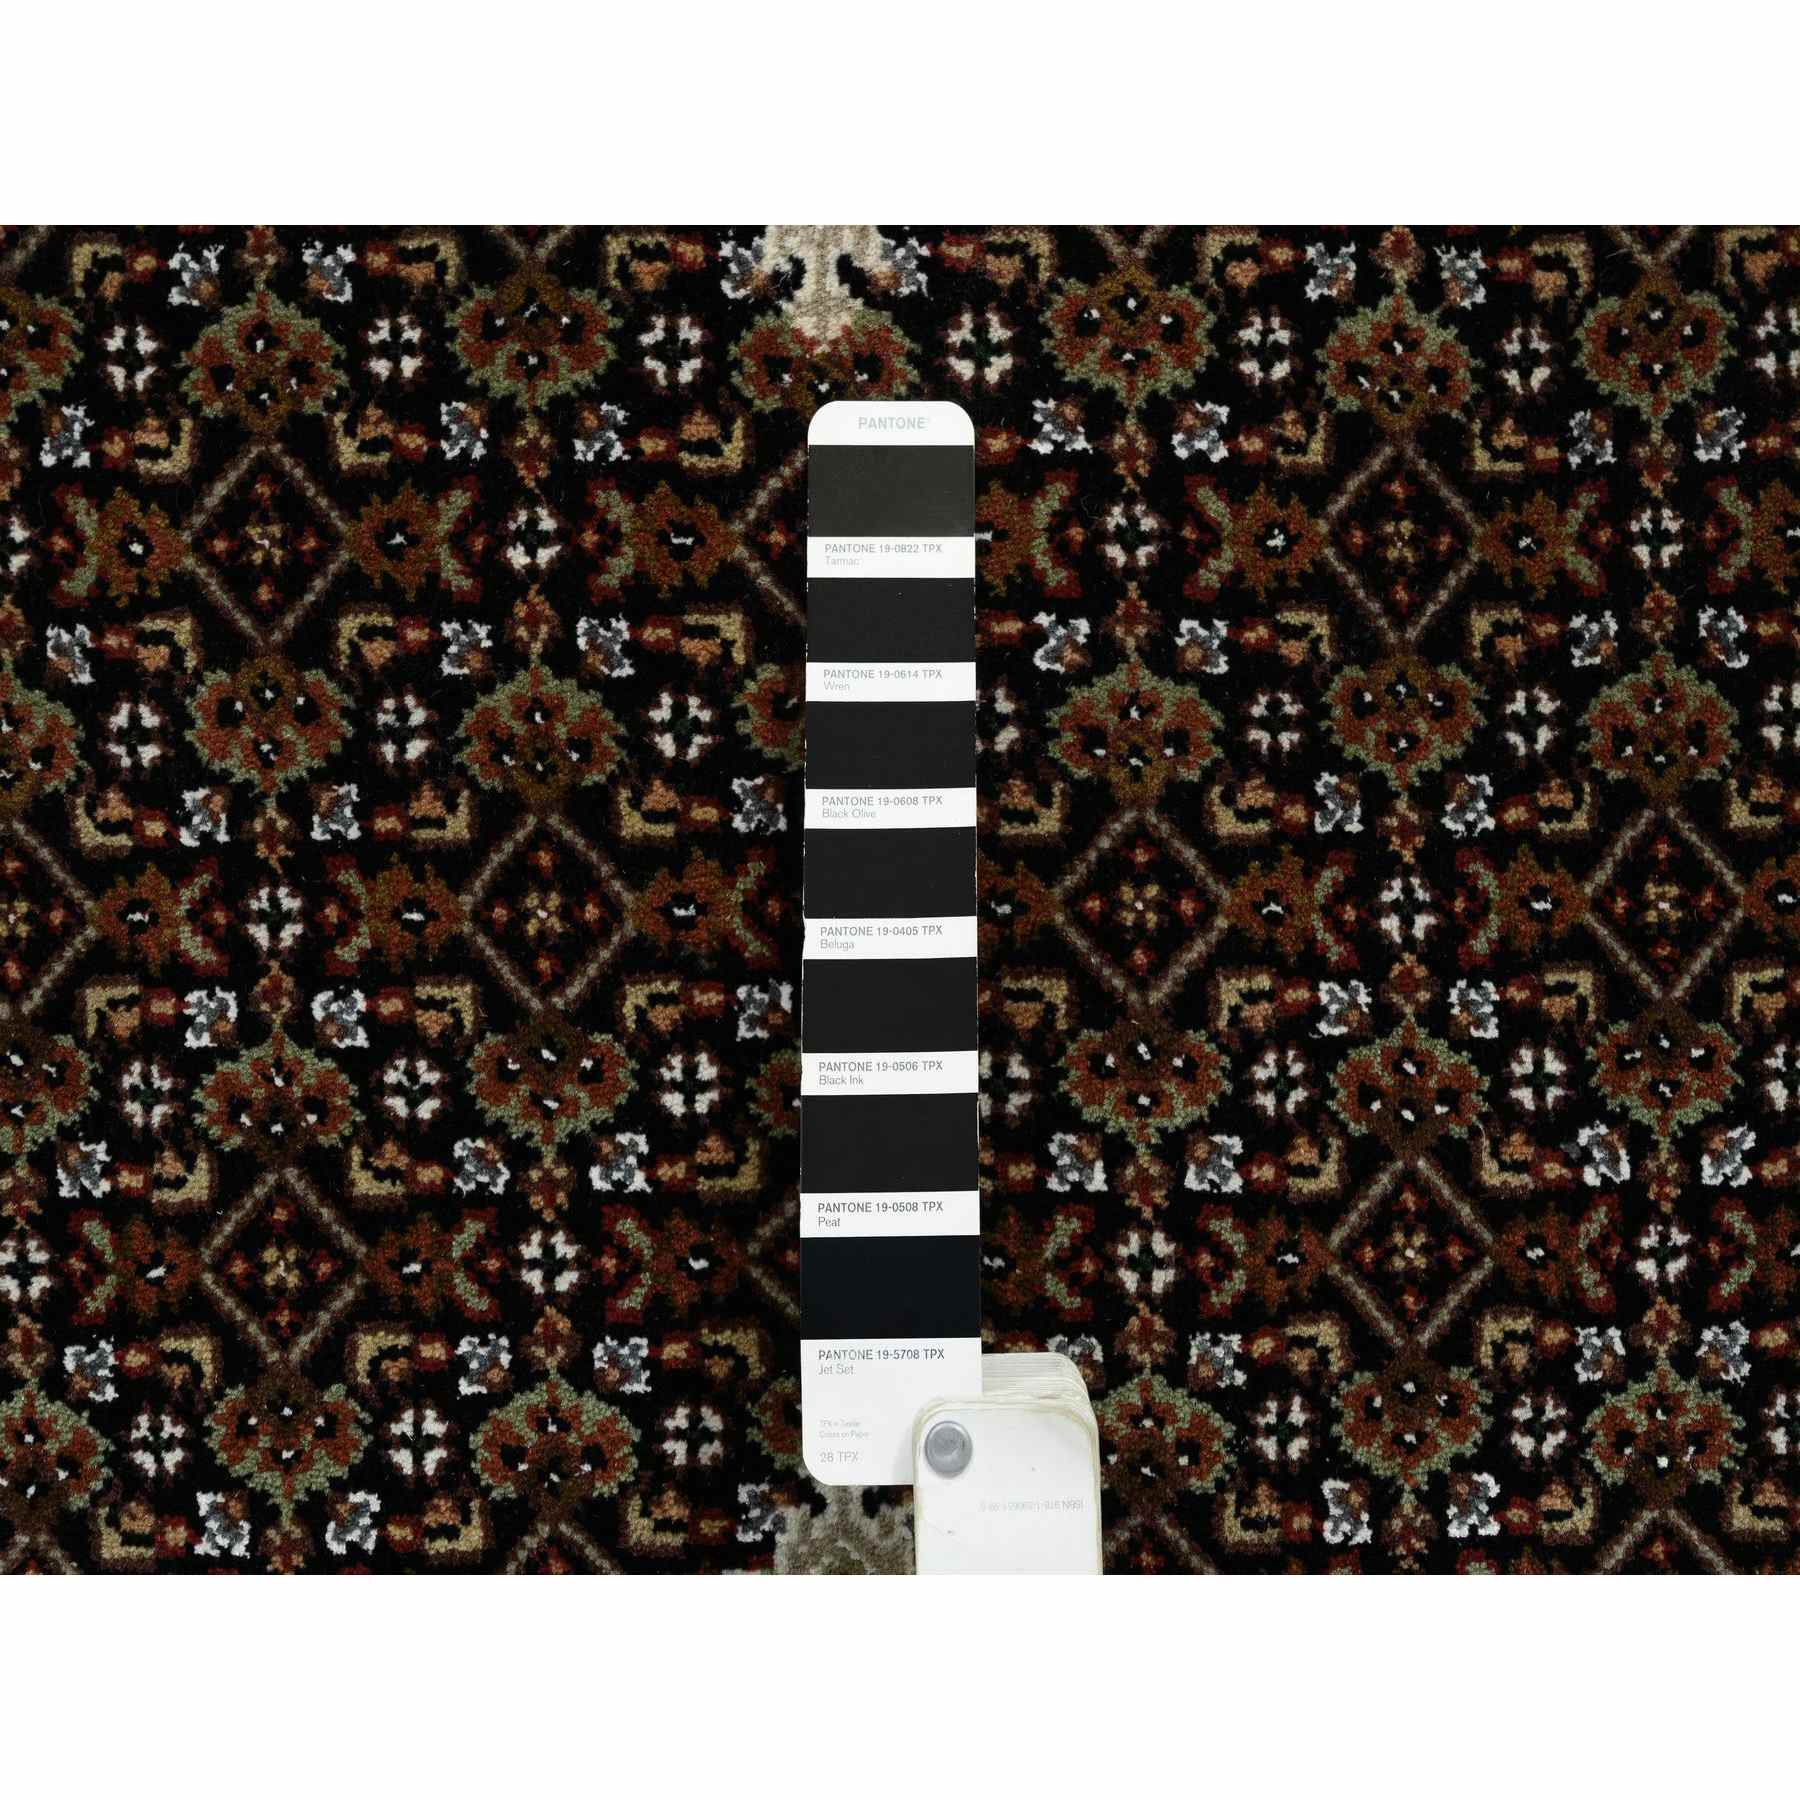 Fine-Oriental-Hand-Knotted-Rug-325315